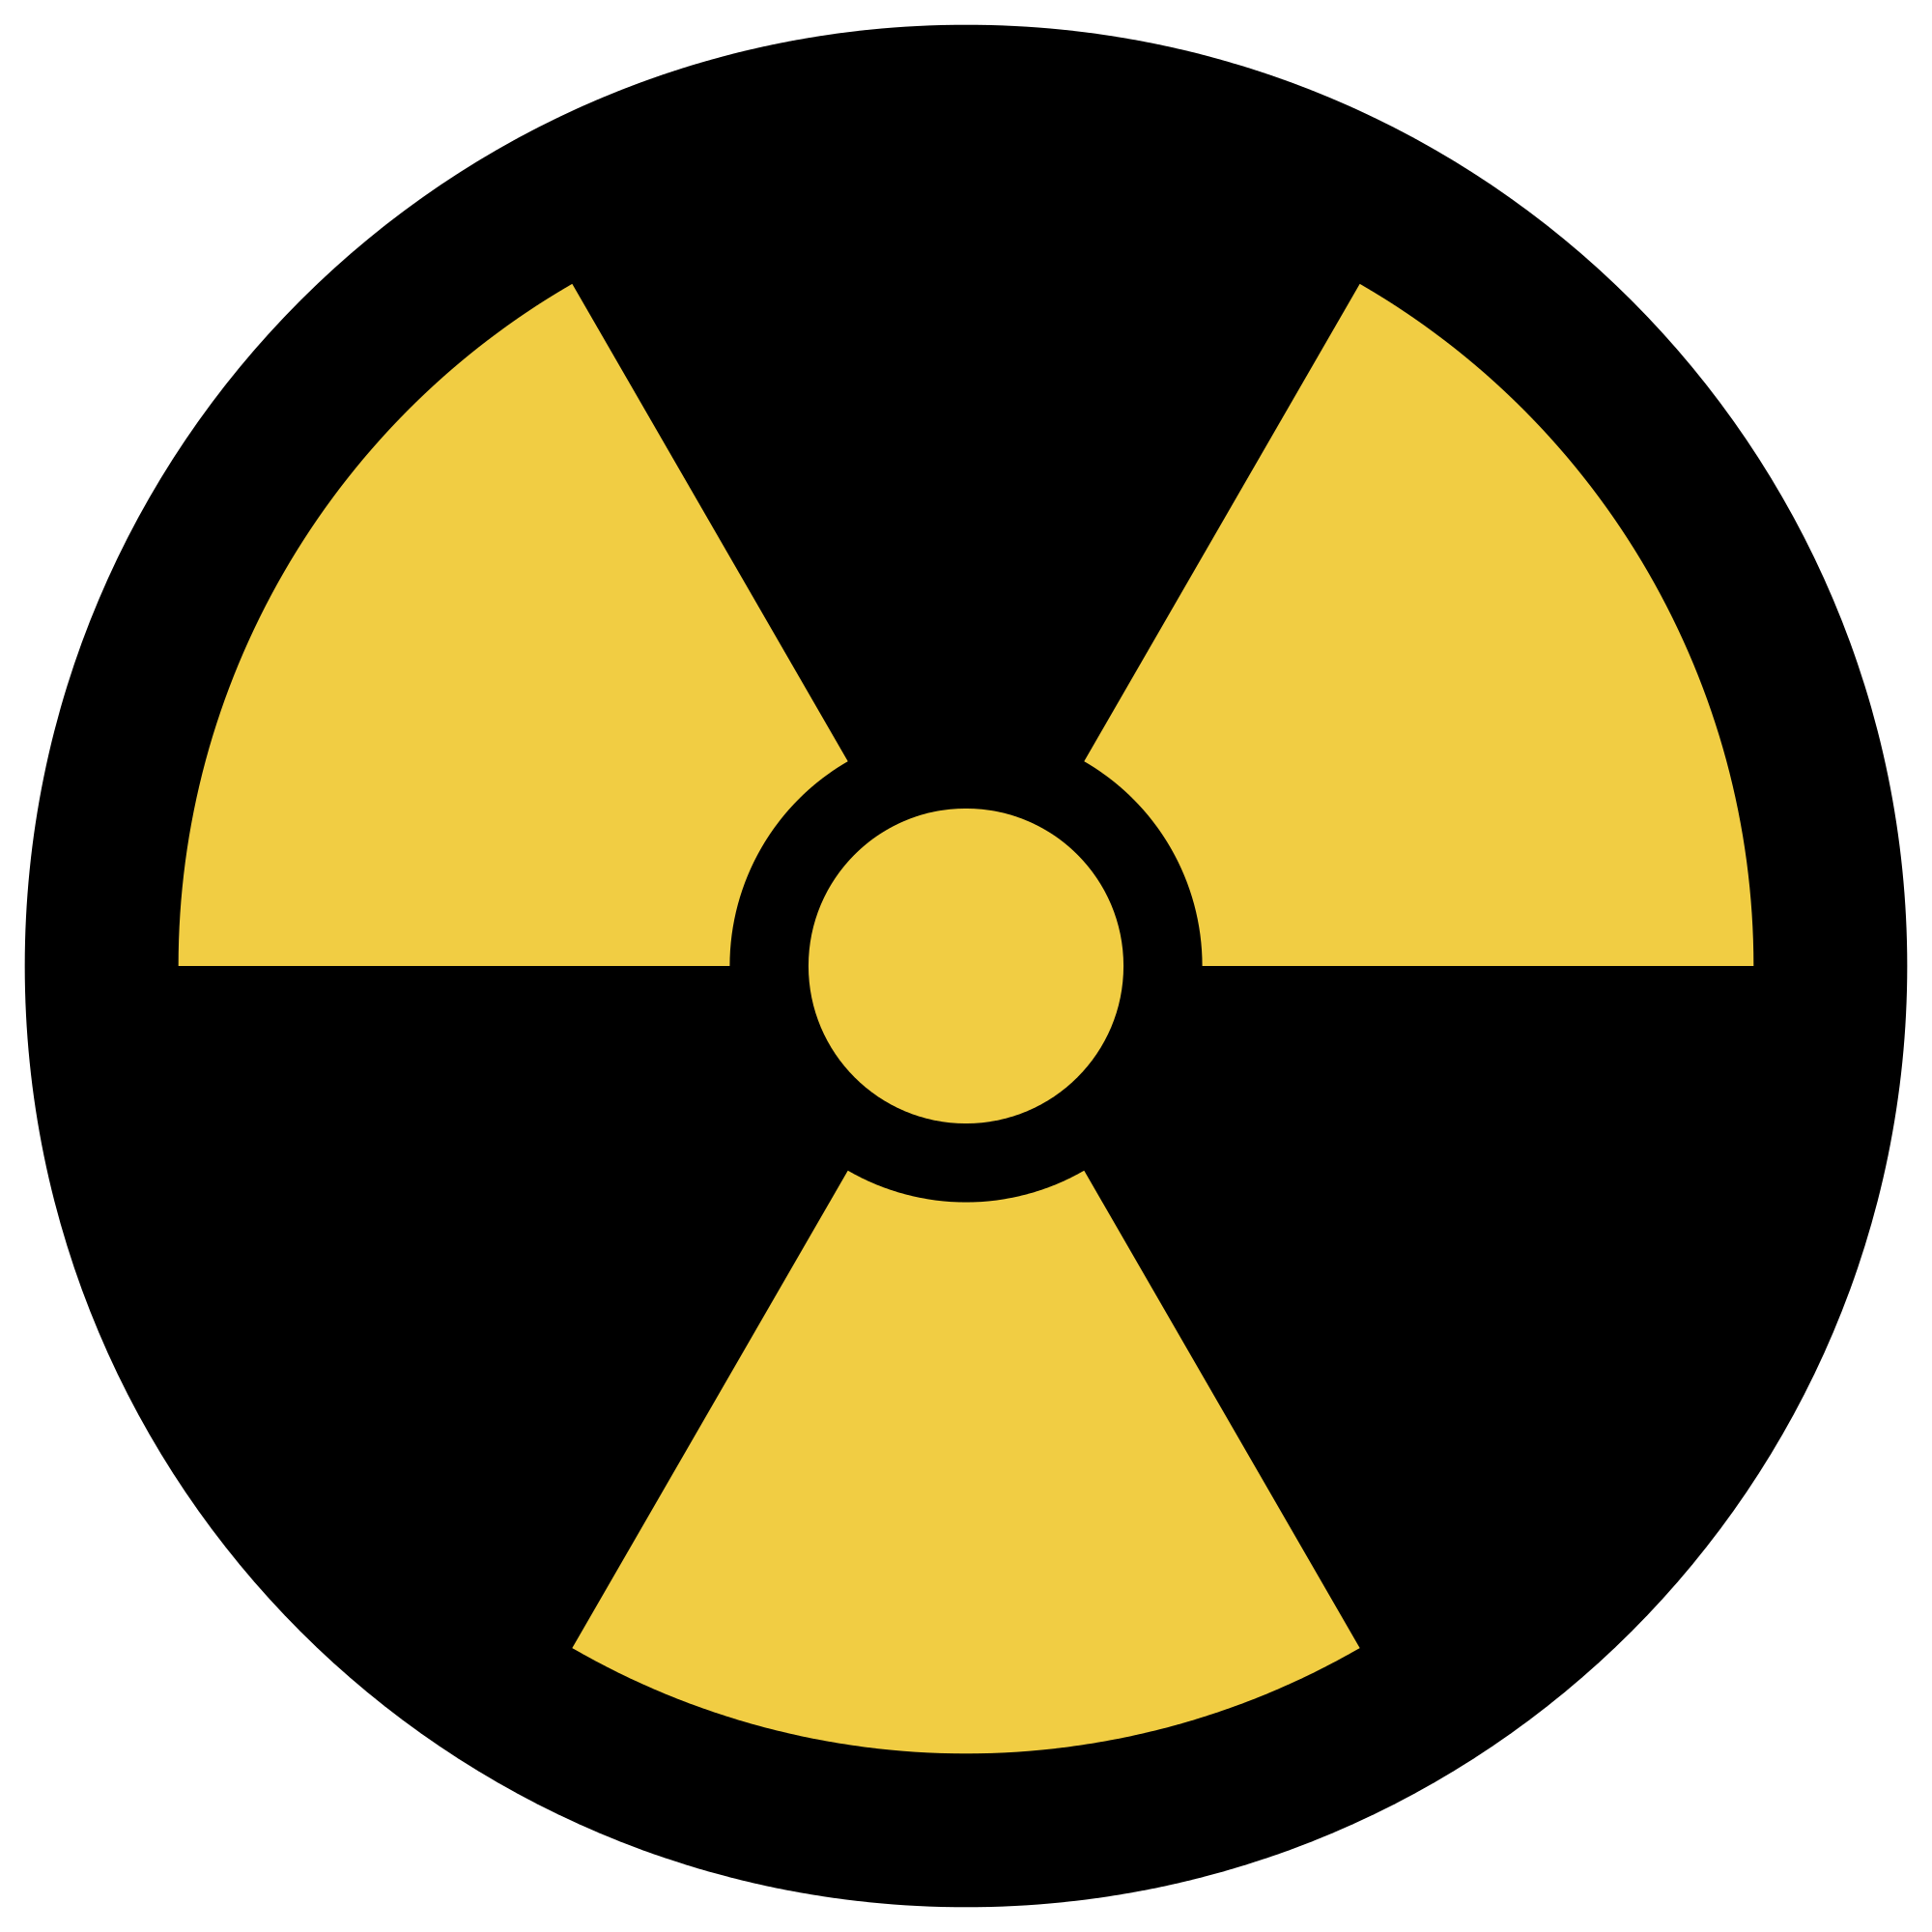 File:Nuclear symbol.svg - Wikimedia Commons